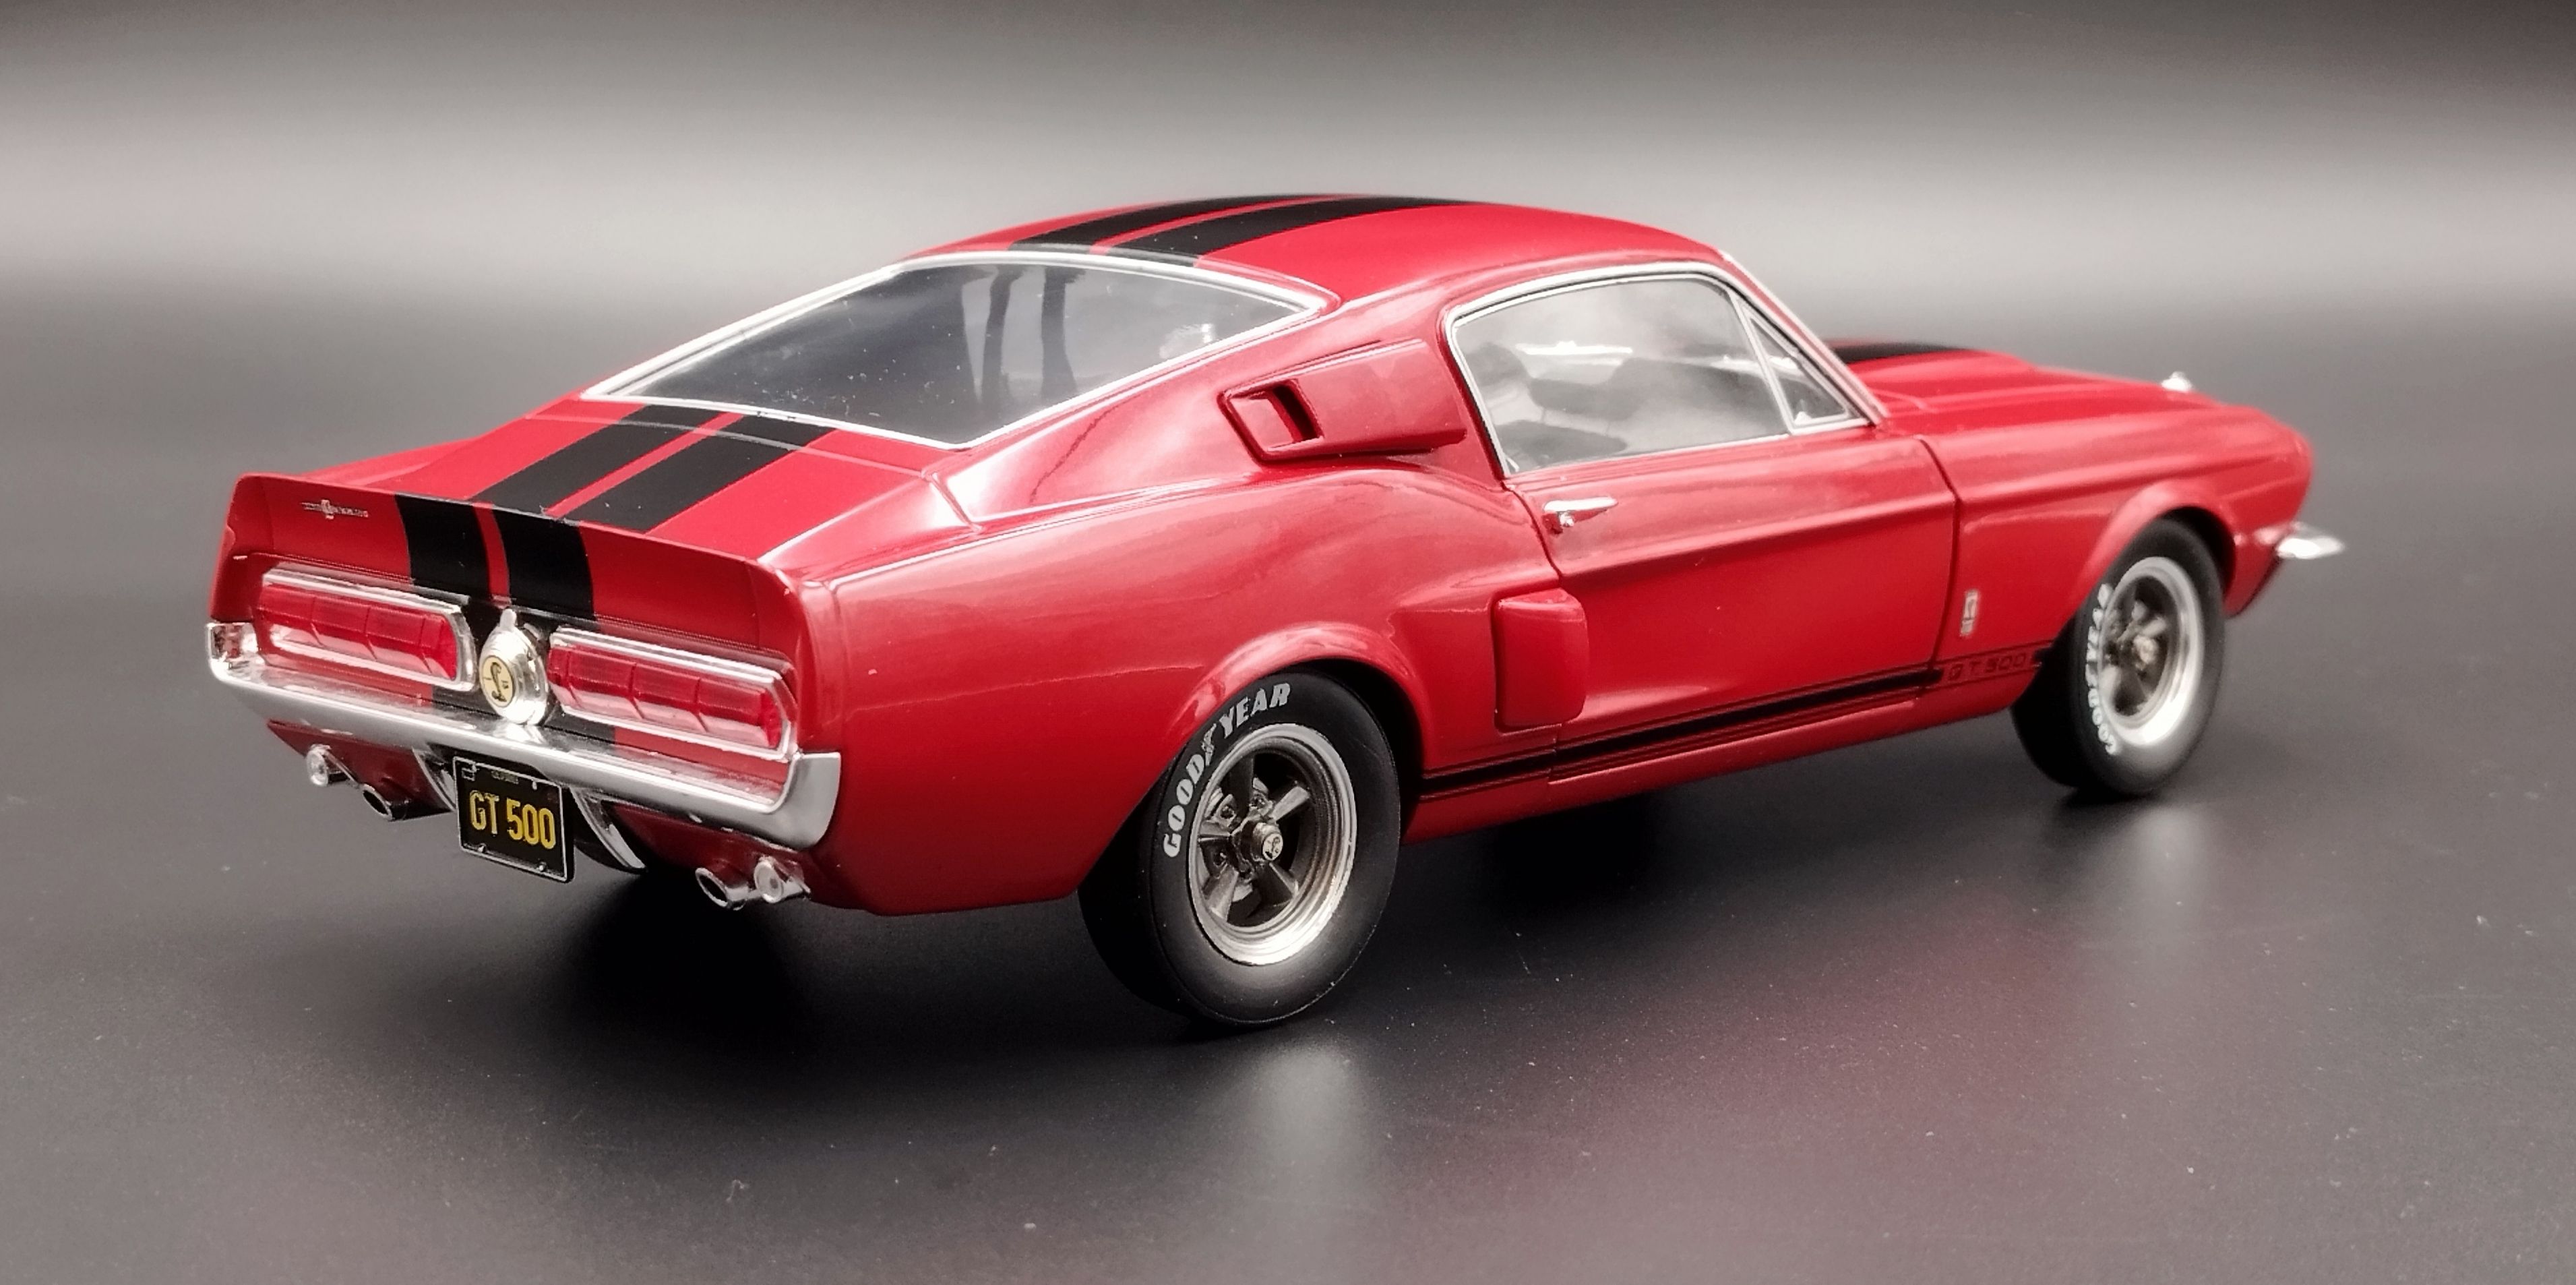 1:18 Solido 1967 Ford Mustang Shelby GT500 Burgundy Red Model Nowy